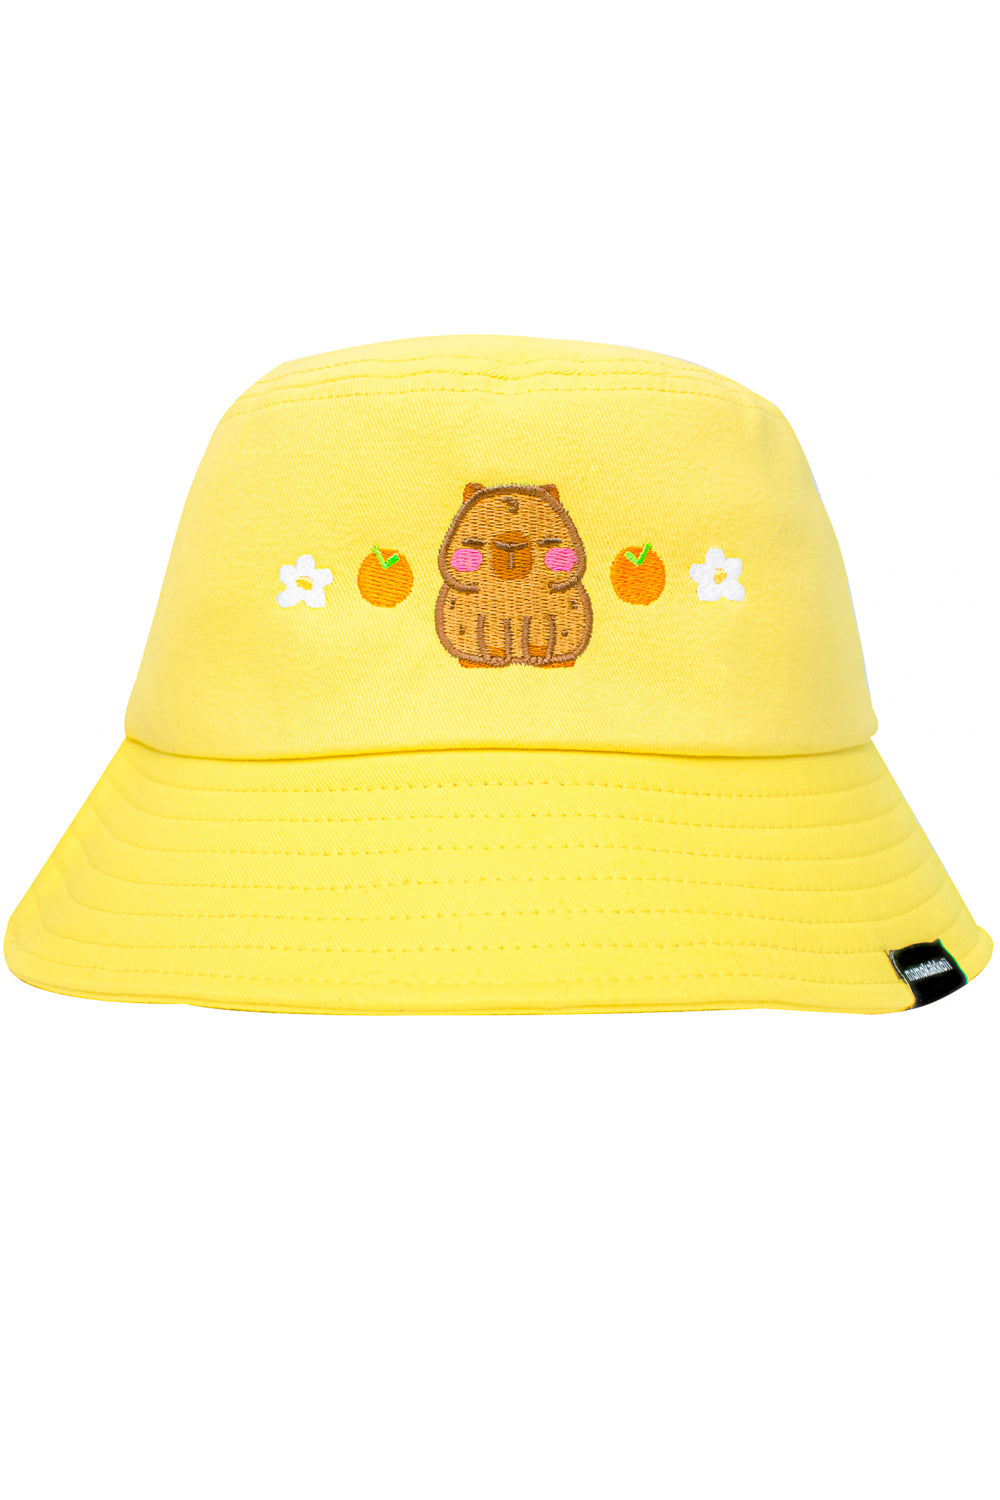 Theo The Capybara Embroidered Bucket Hat